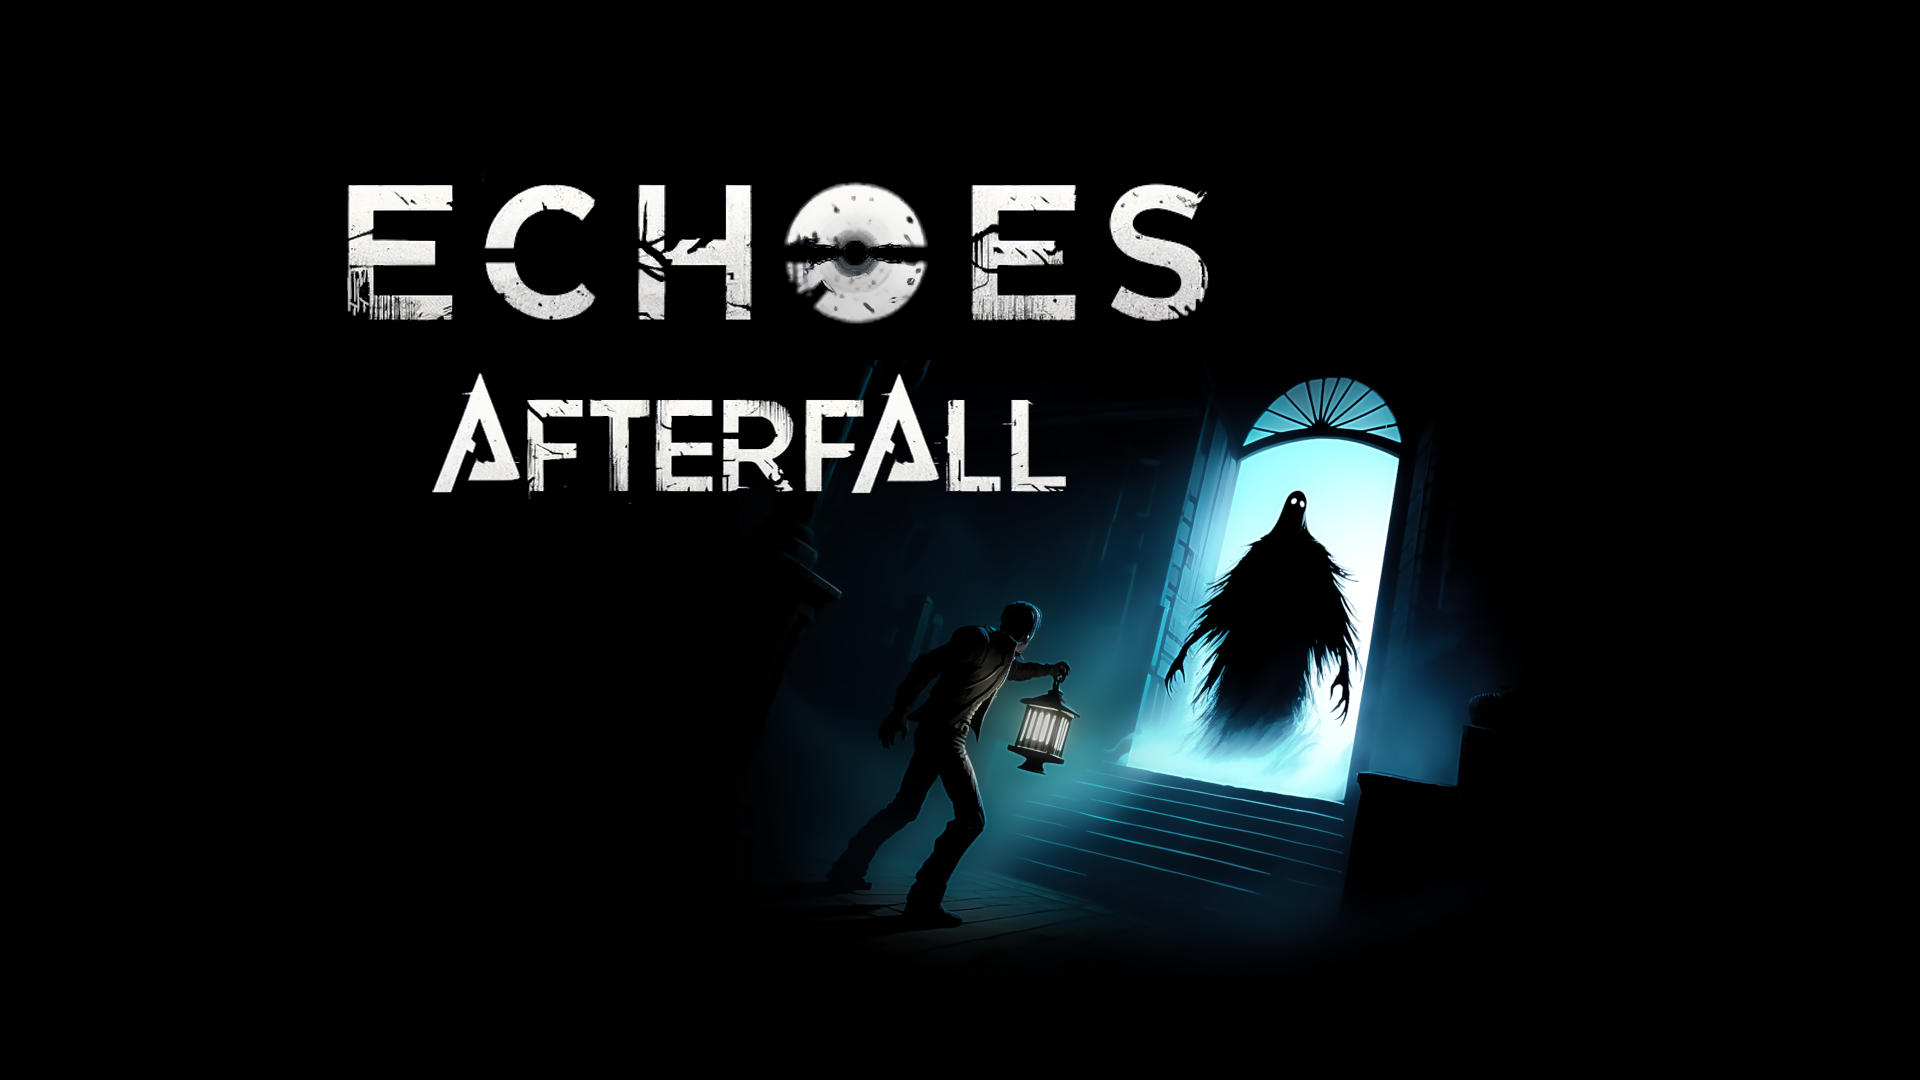 Echoes Afterfall